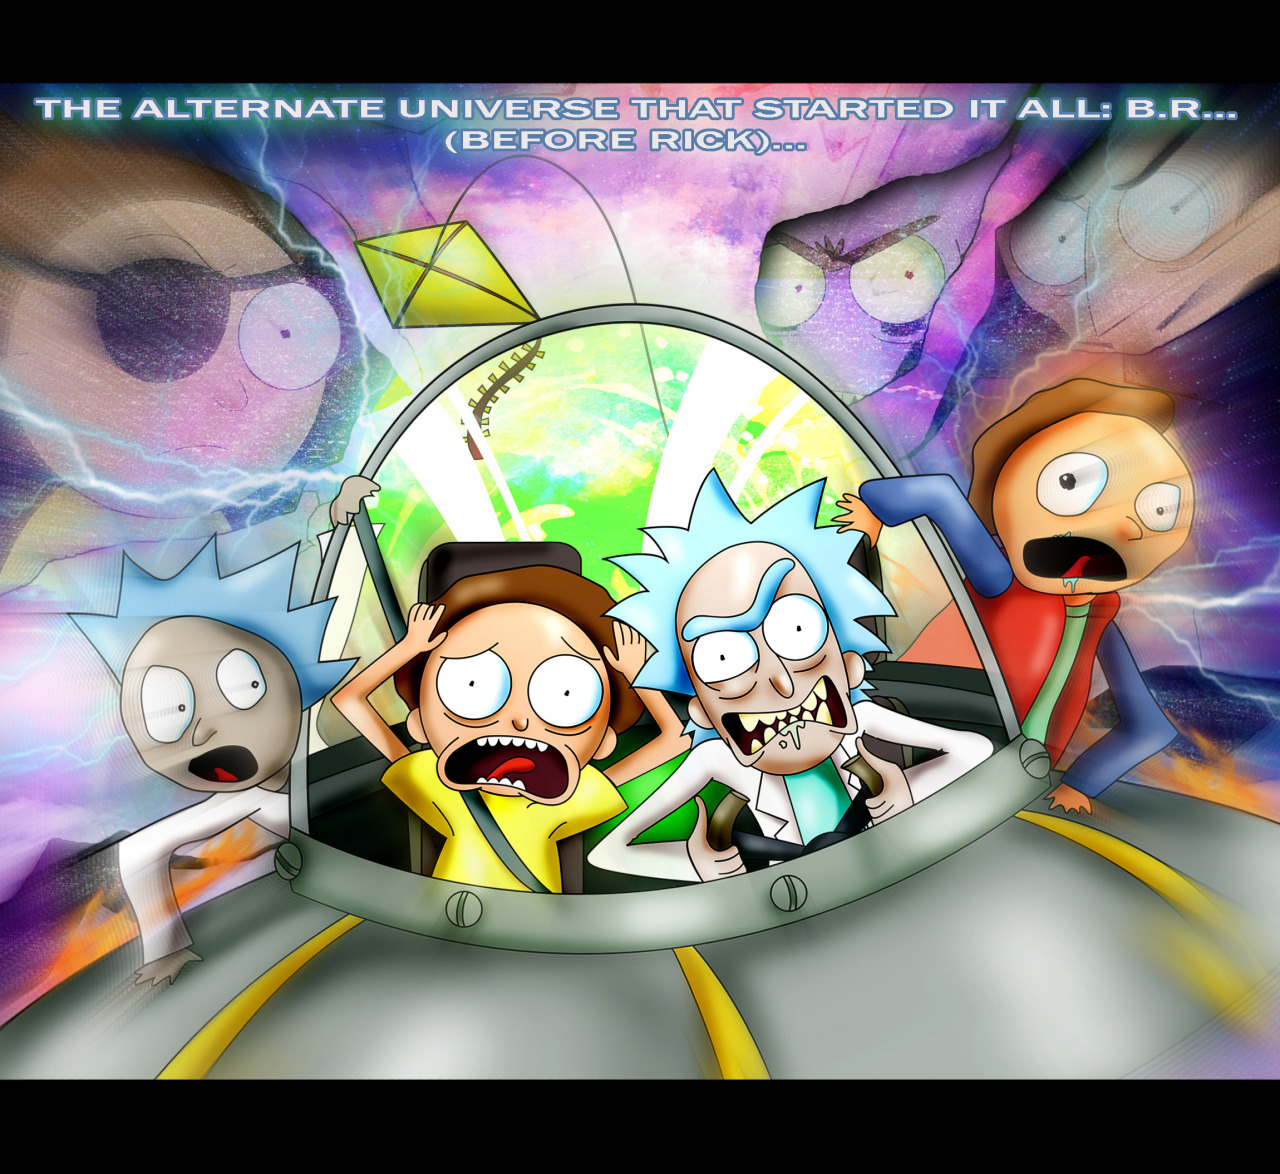 xeternalflamebryx — My submission for the Rick and Morty Contest. I...